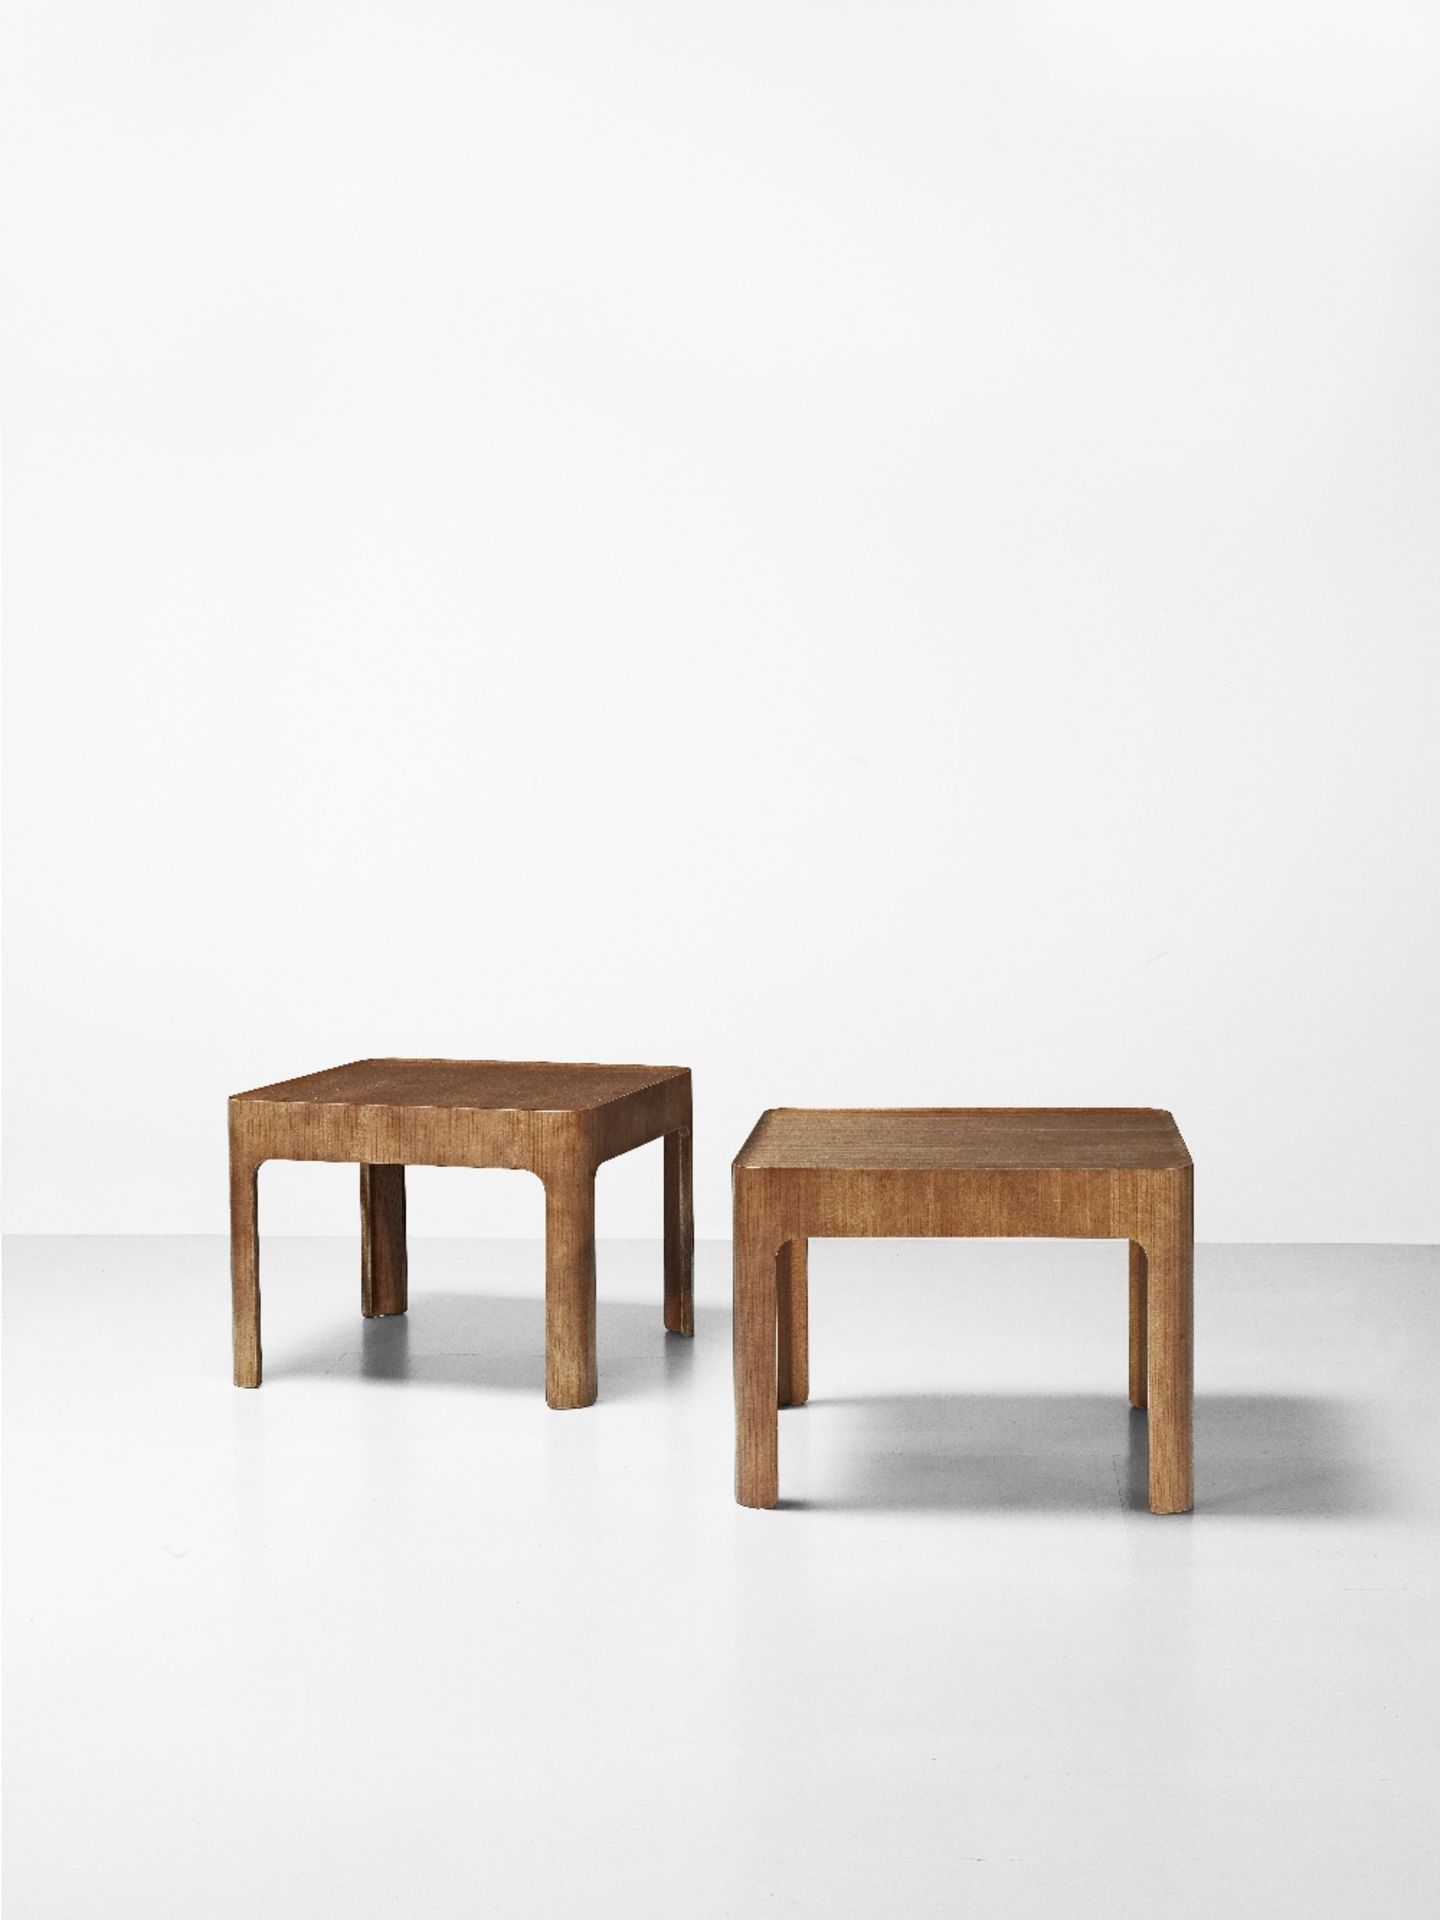 Isamu Kenmochi Pair of 'Haco' occasional tables, model no. SM6003, designed for the National Kyo...